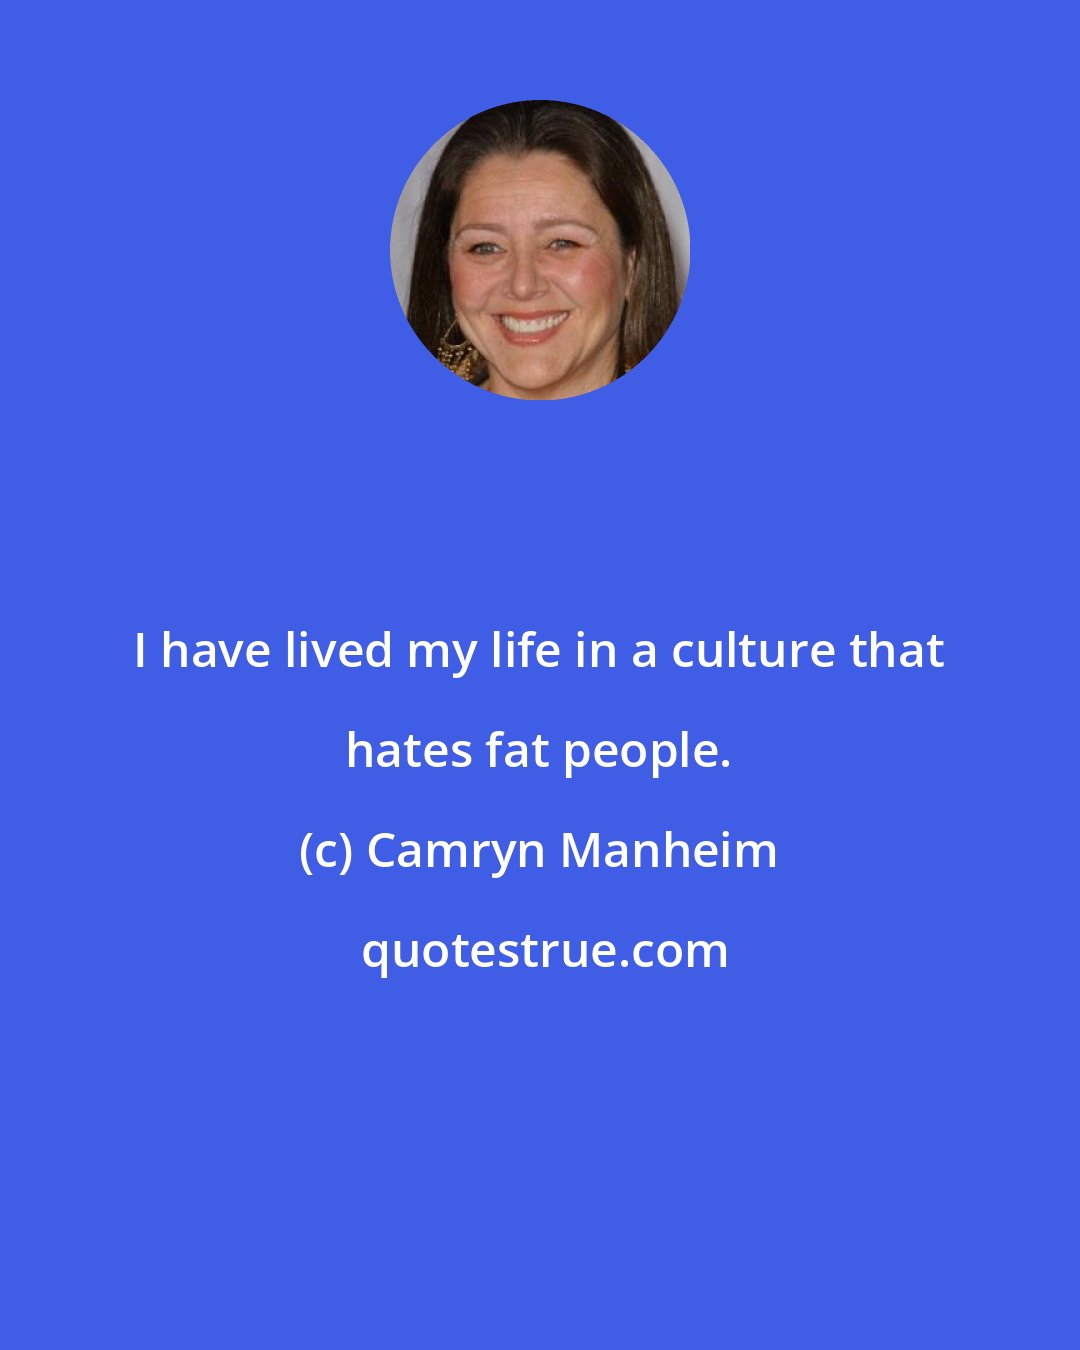 Camryn Manheim: I have lived my life in a culture that hates fat people.